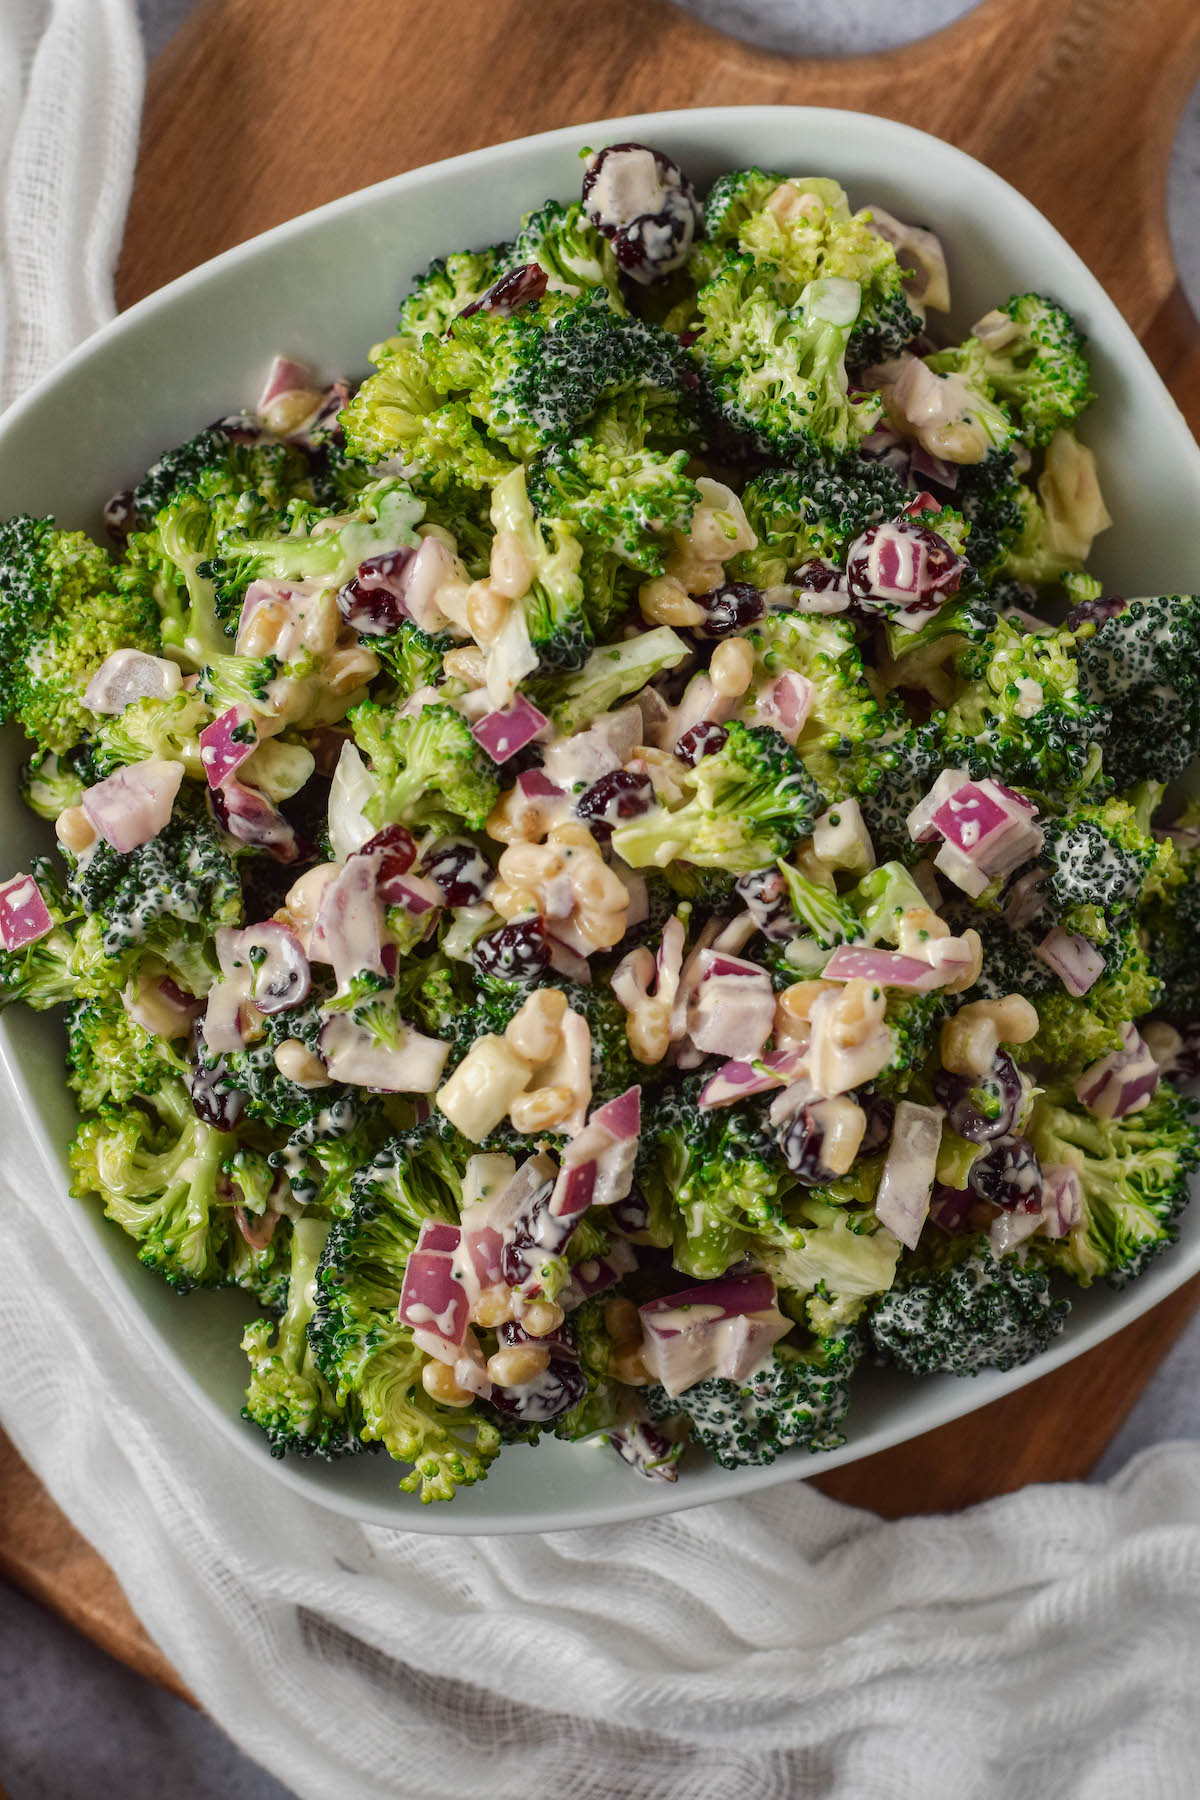 top view of broccoli salad in a white bowl on a wooden cutting board